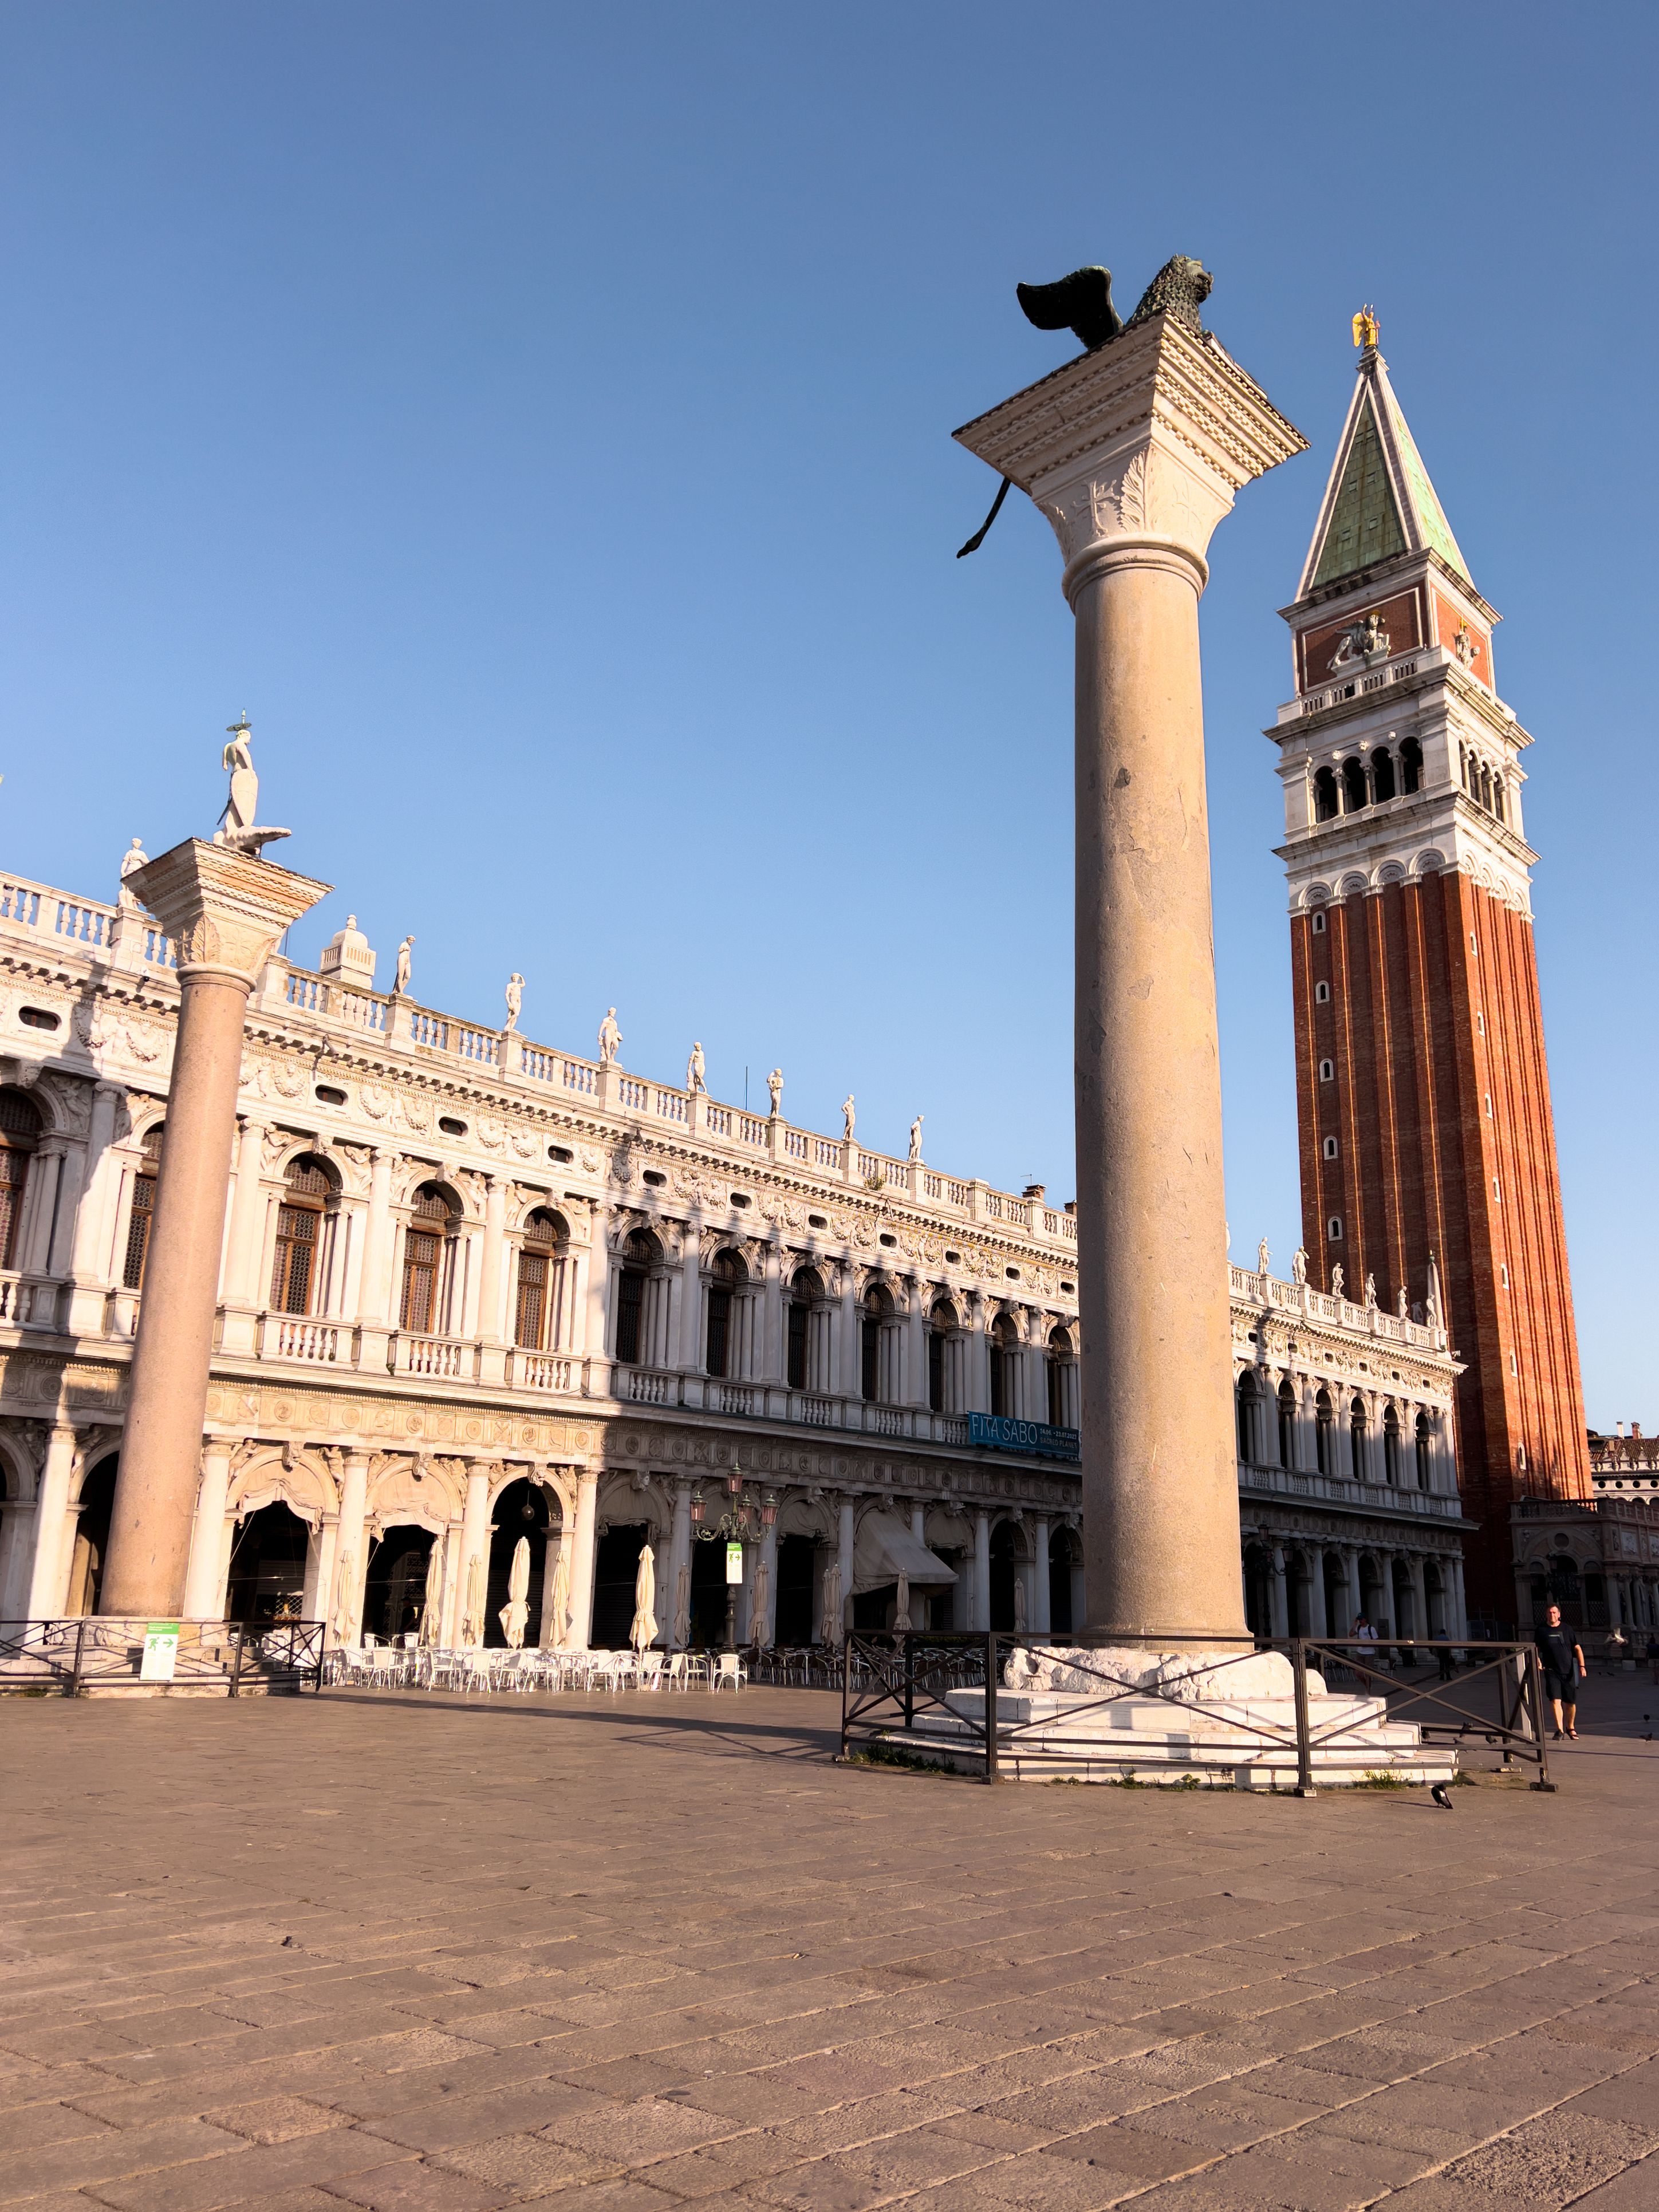 Top things to do in Venice